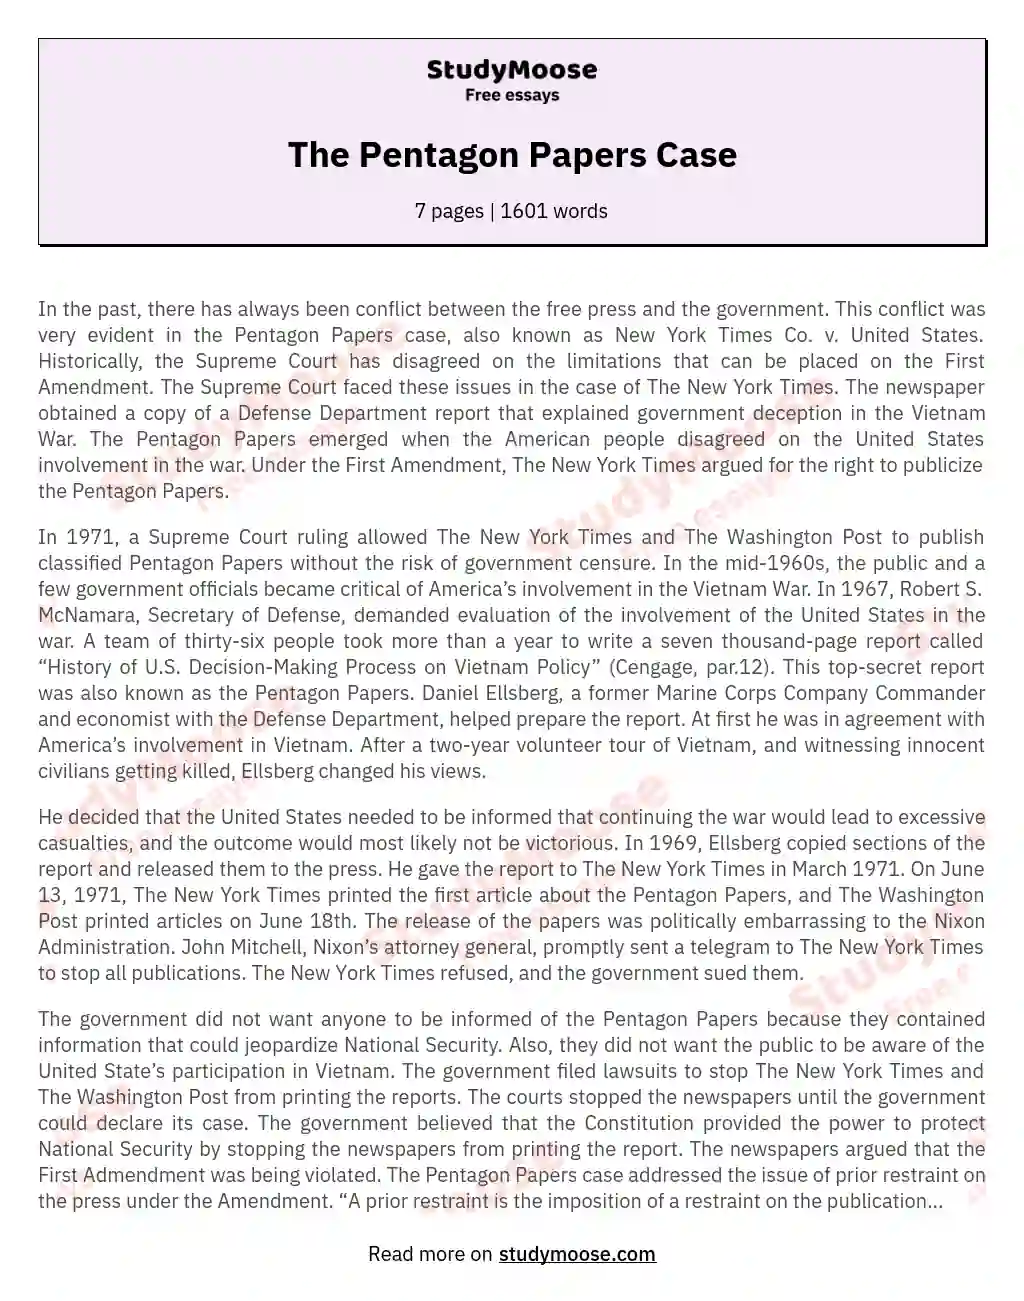 The Pentagon Papers Case: Defending Press Freedom essay